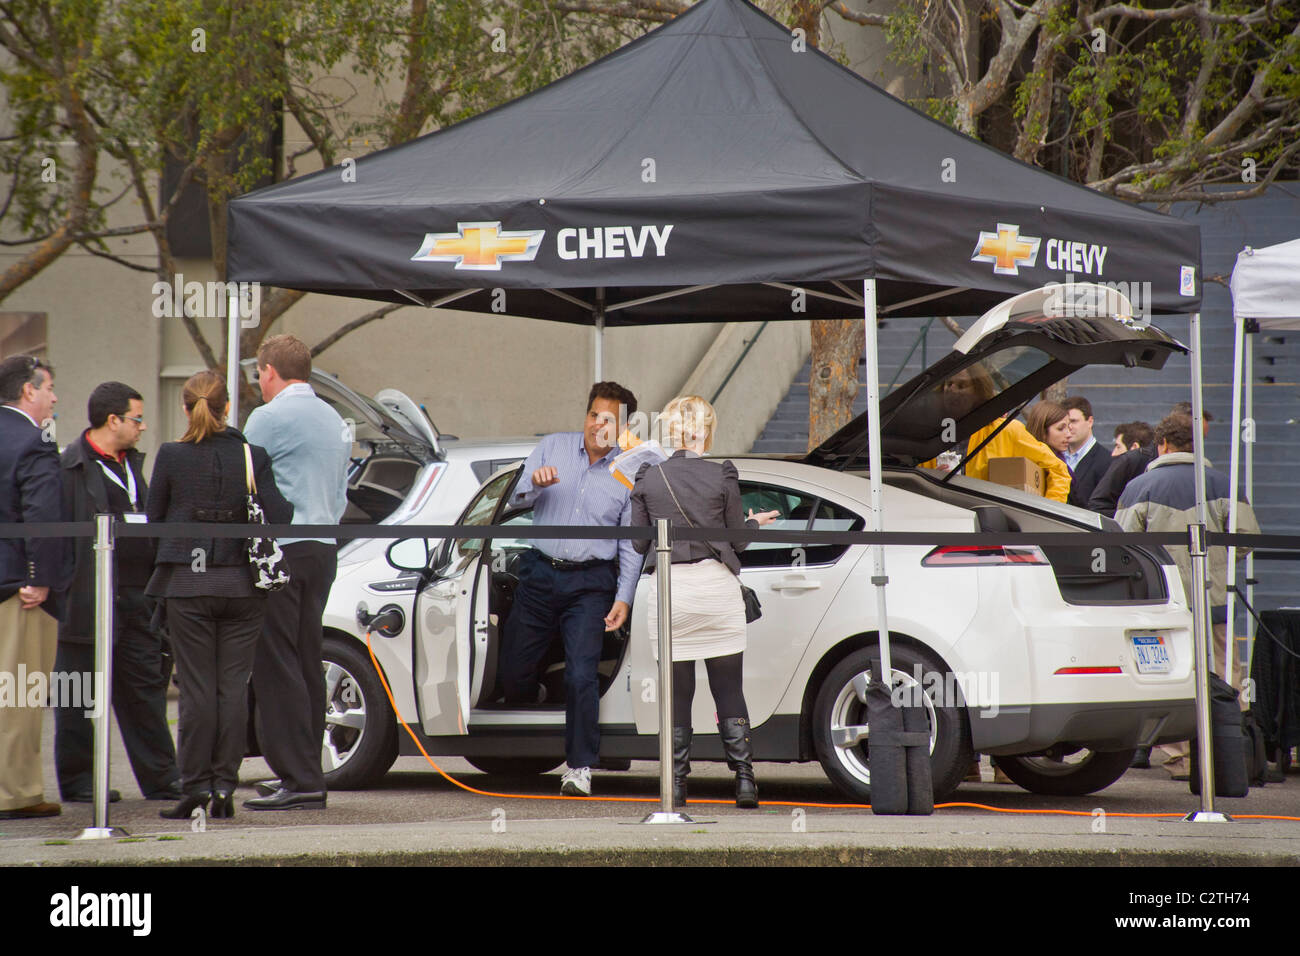 A Chevrolet Volt hybrid gas/electric car is on exhibit in Embarcadero Center in downtown San Francisco. Stock Photo